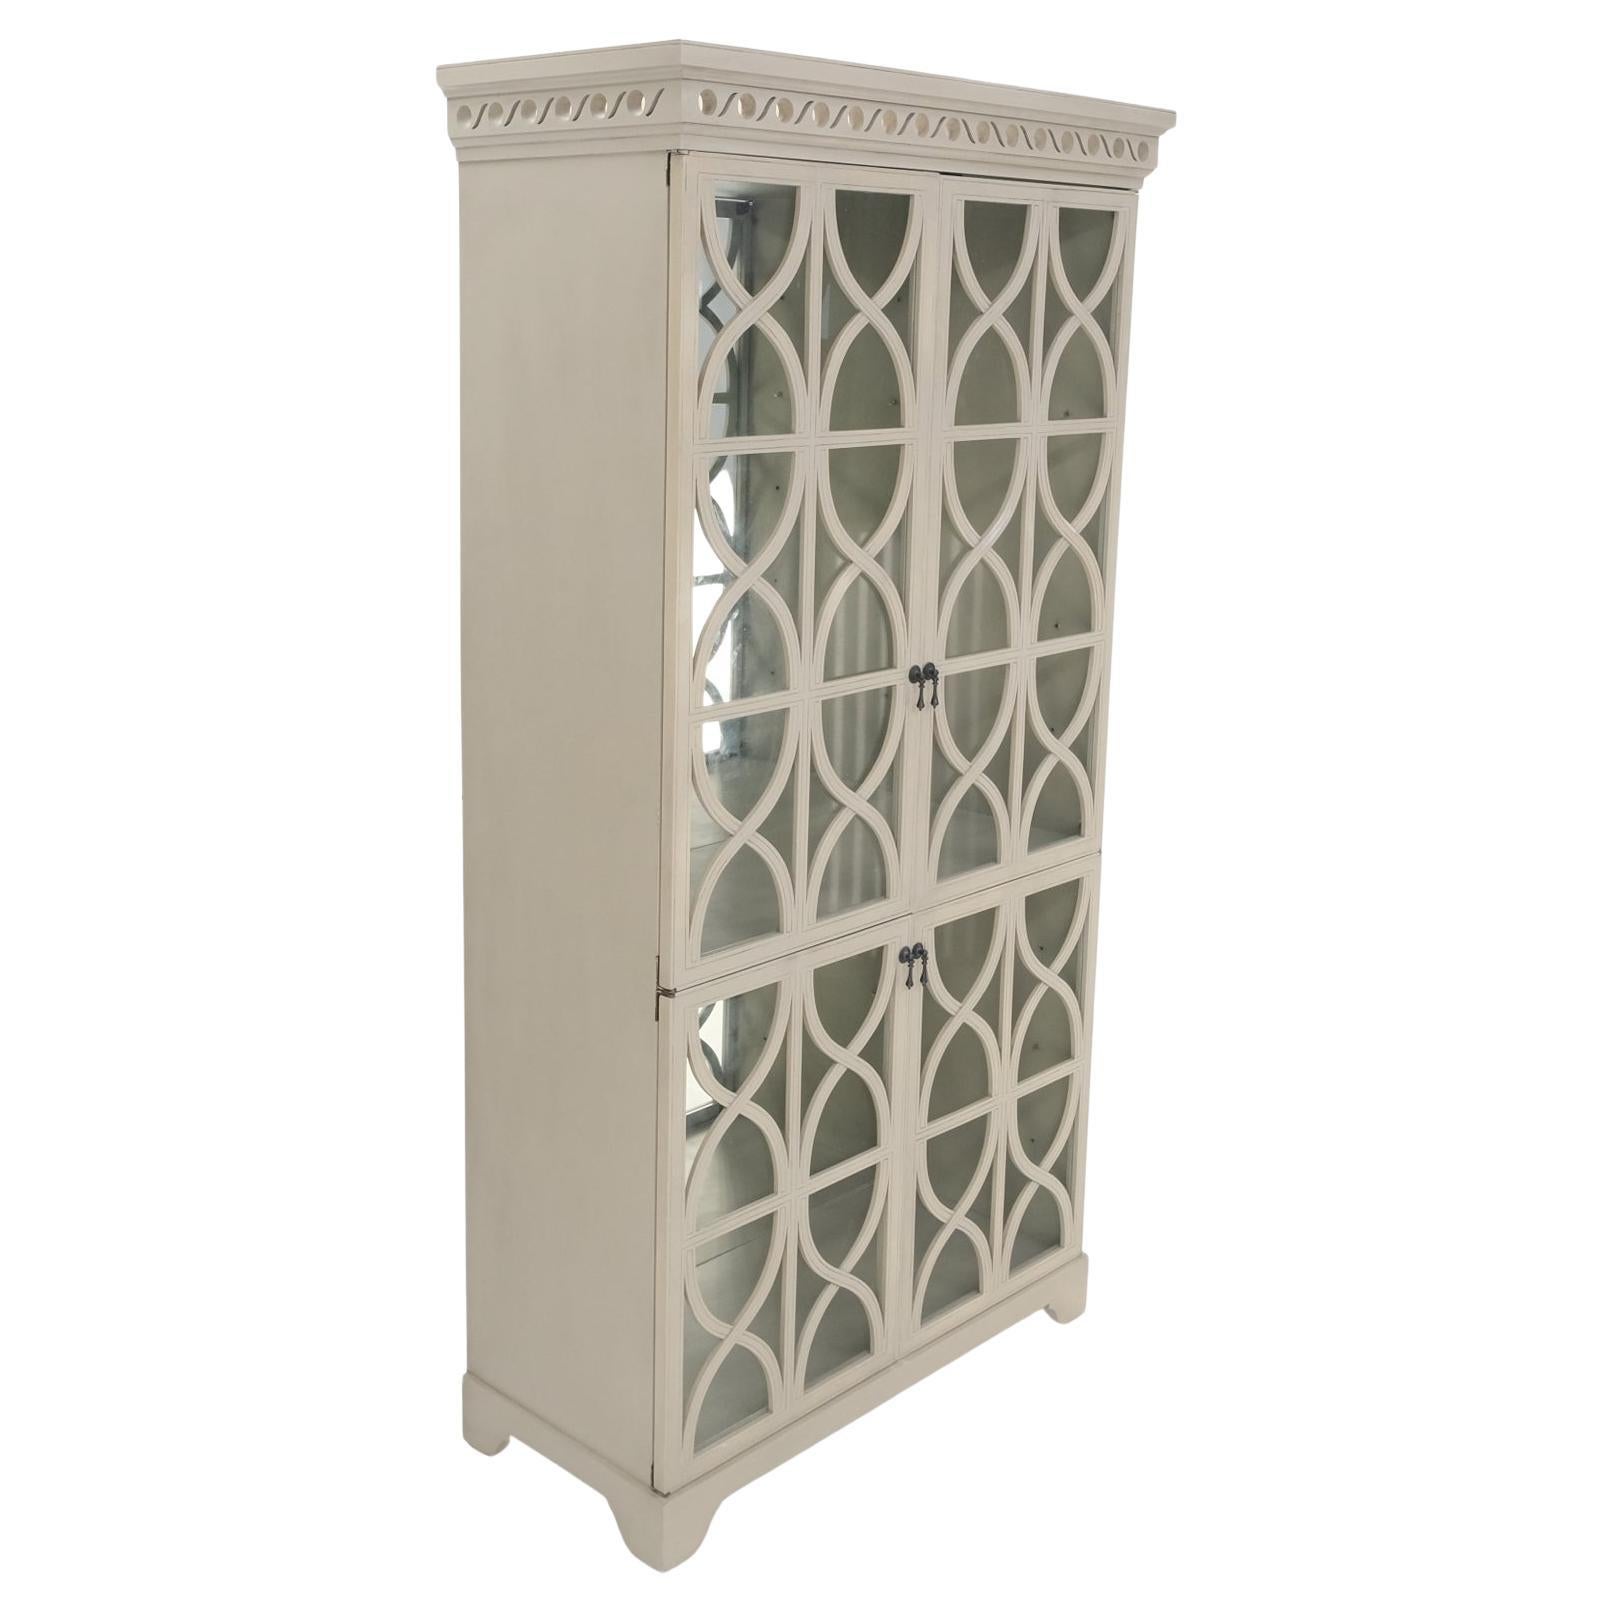 Large painted mirrored decorative double door cabinet cupboard vitrine.